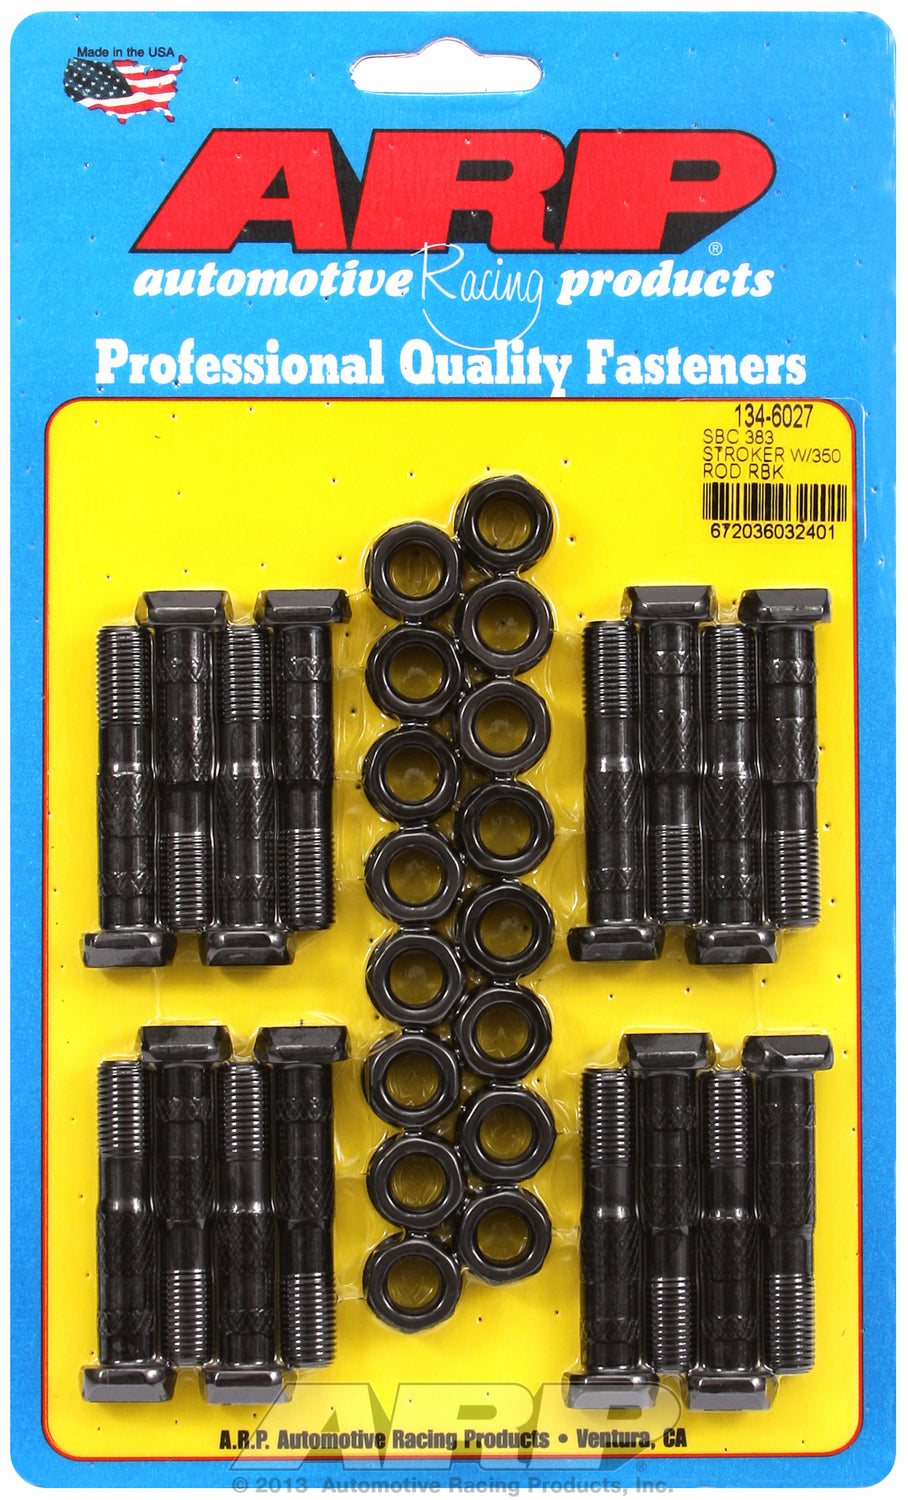 Hi-Perf 8740 Complete Rod Bolt Kit for Chevrolet 383 Stroker w/ 350 rod (extra head clearance)